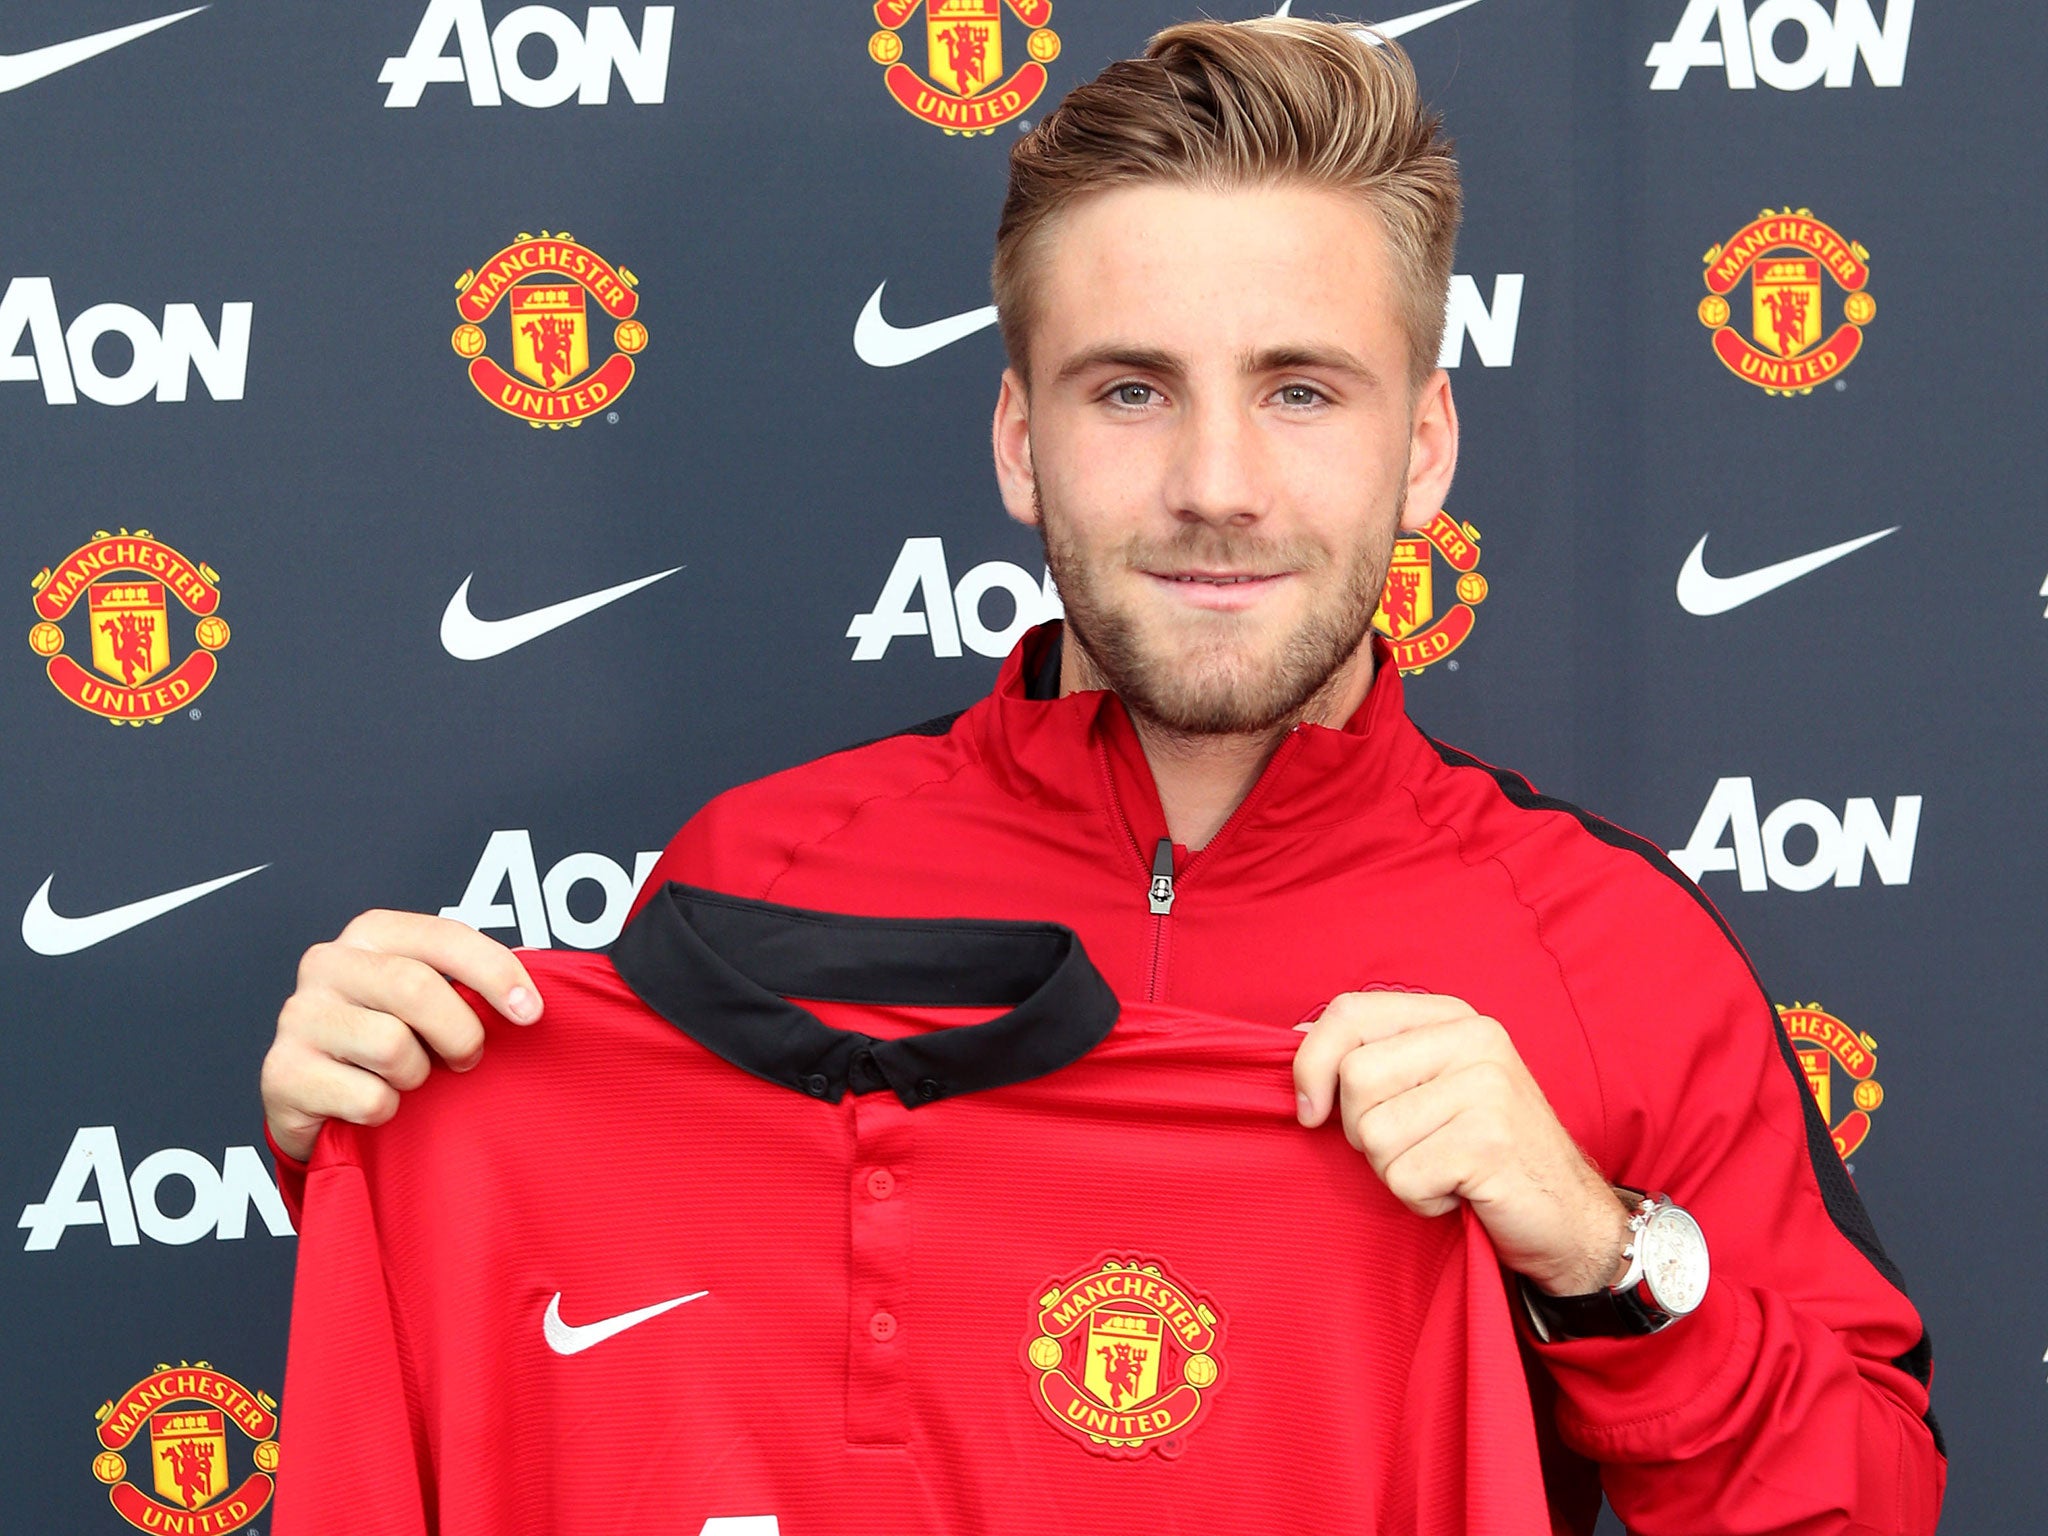 Luke Shaw has joined Manchester United